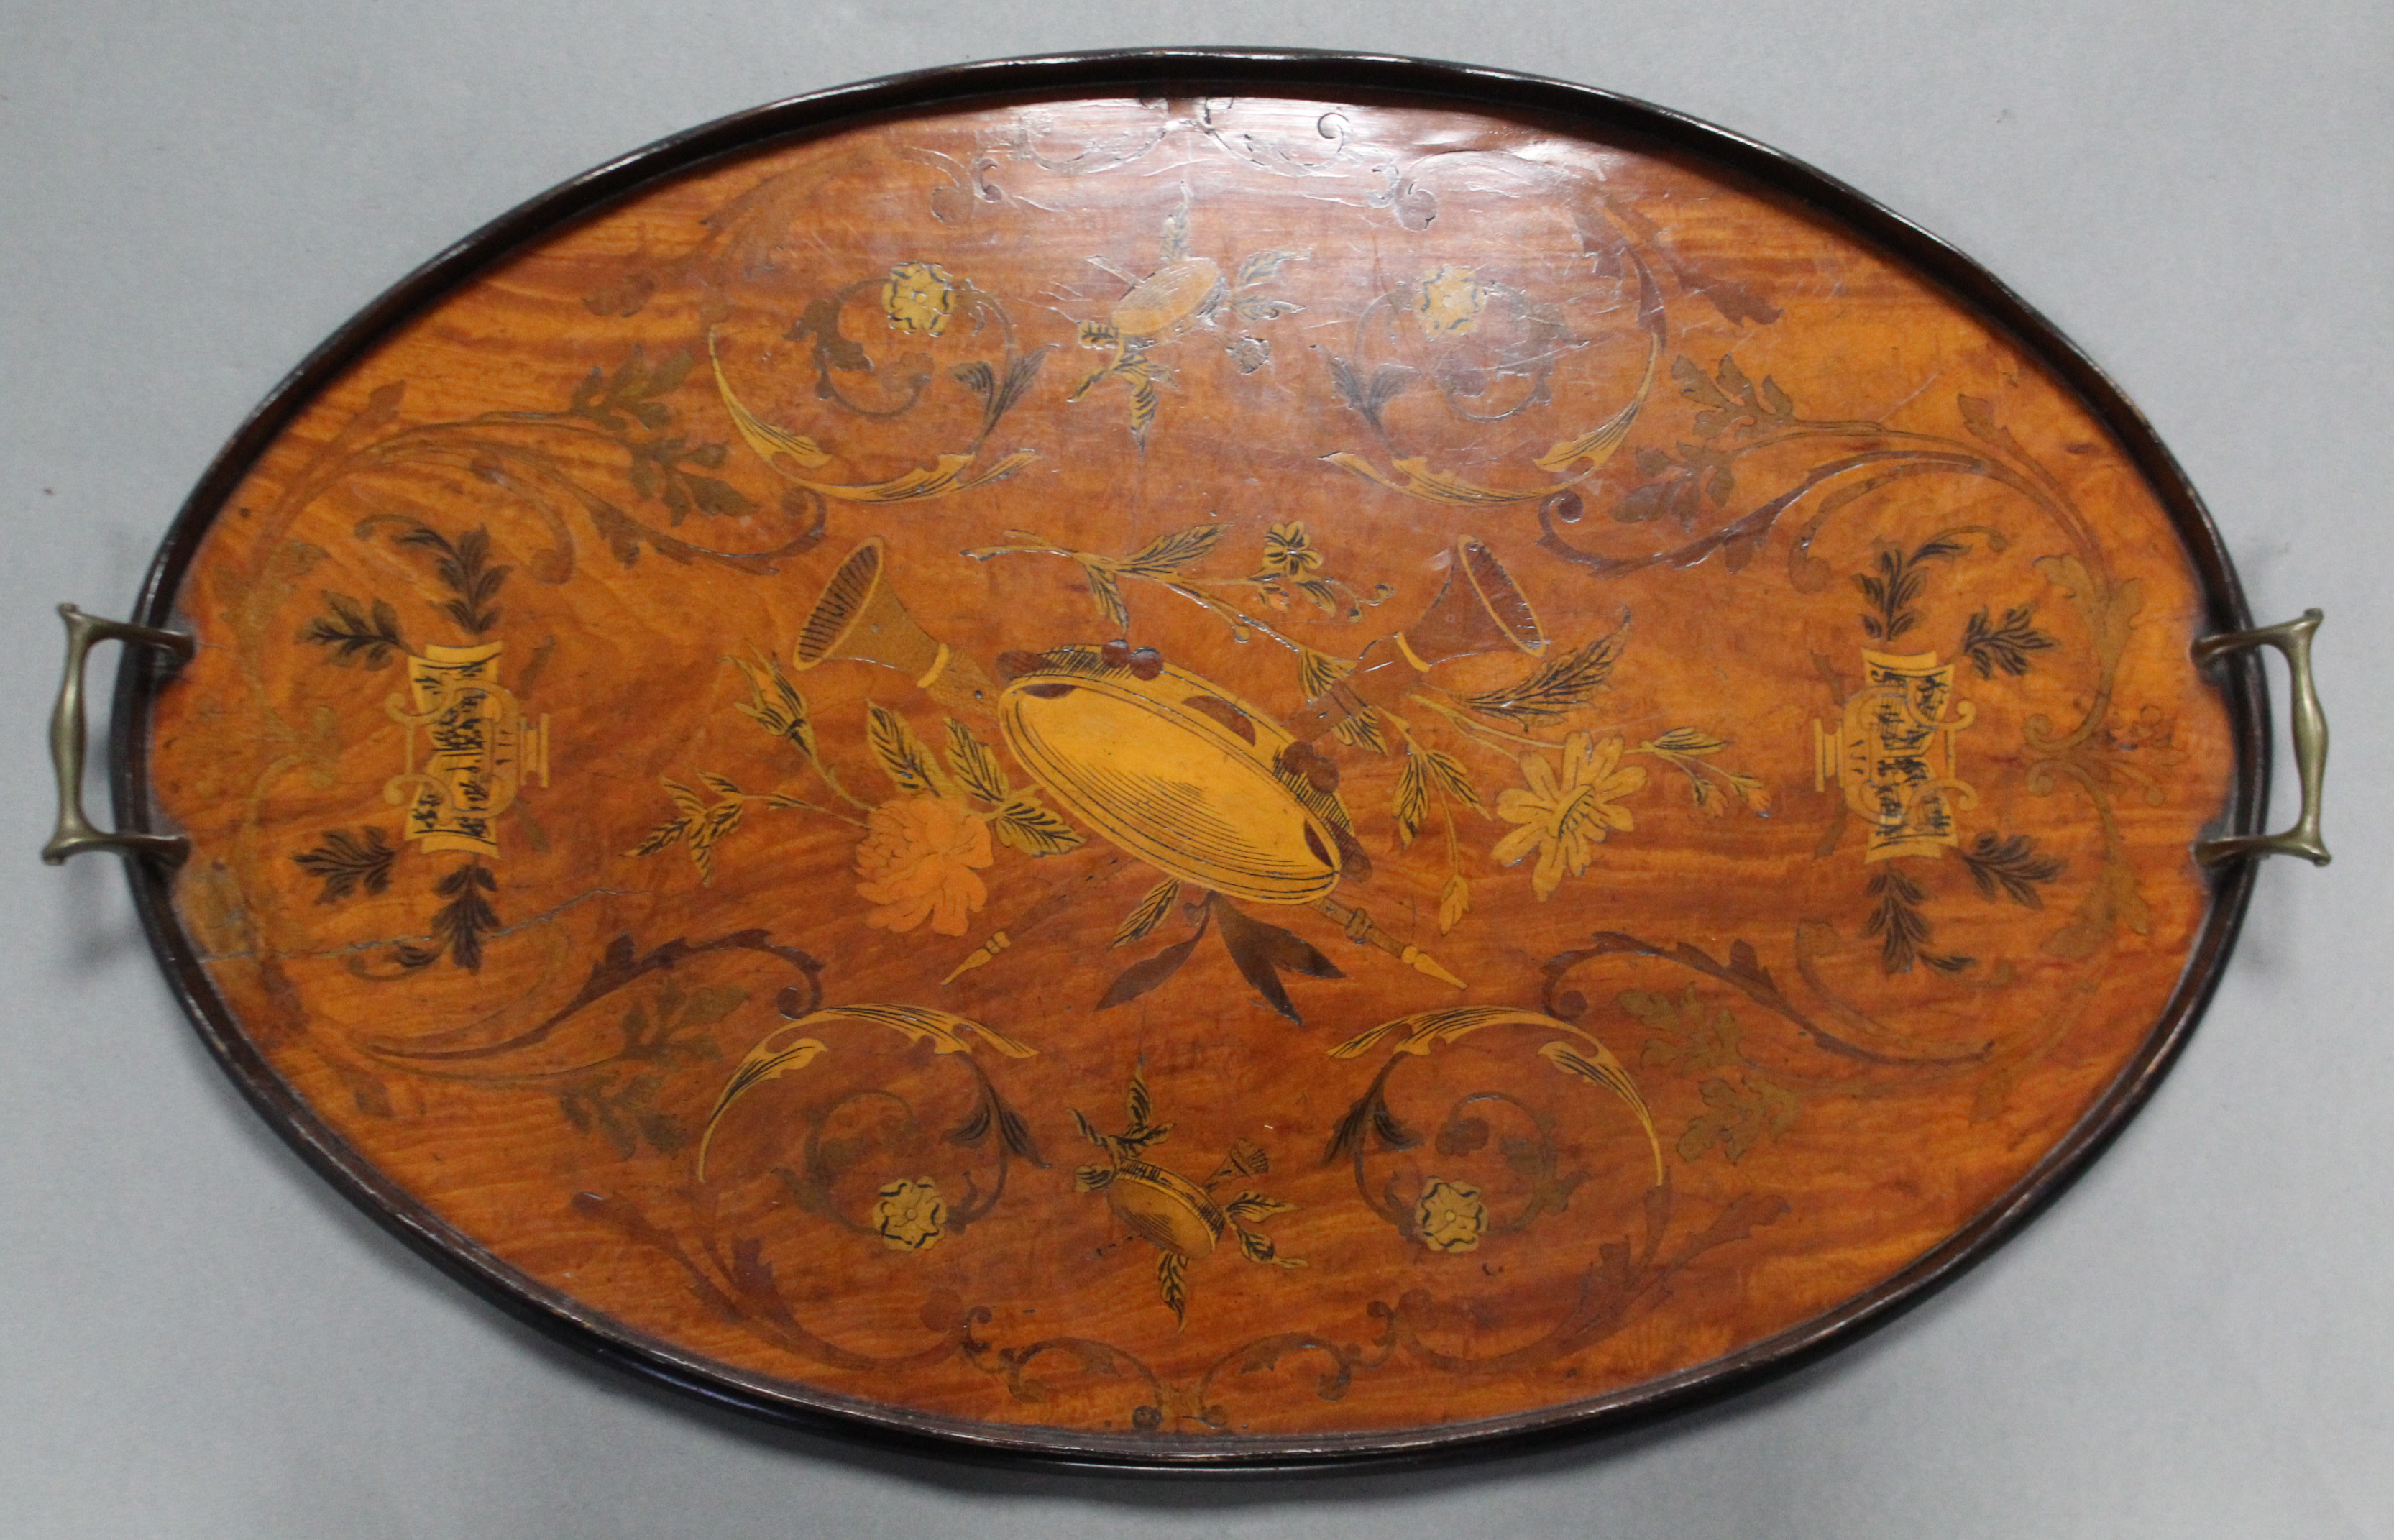 A 19th century mahogany oval tray with marquetry decoration of musical instruments & floral scrolls, - Image 2 of 2